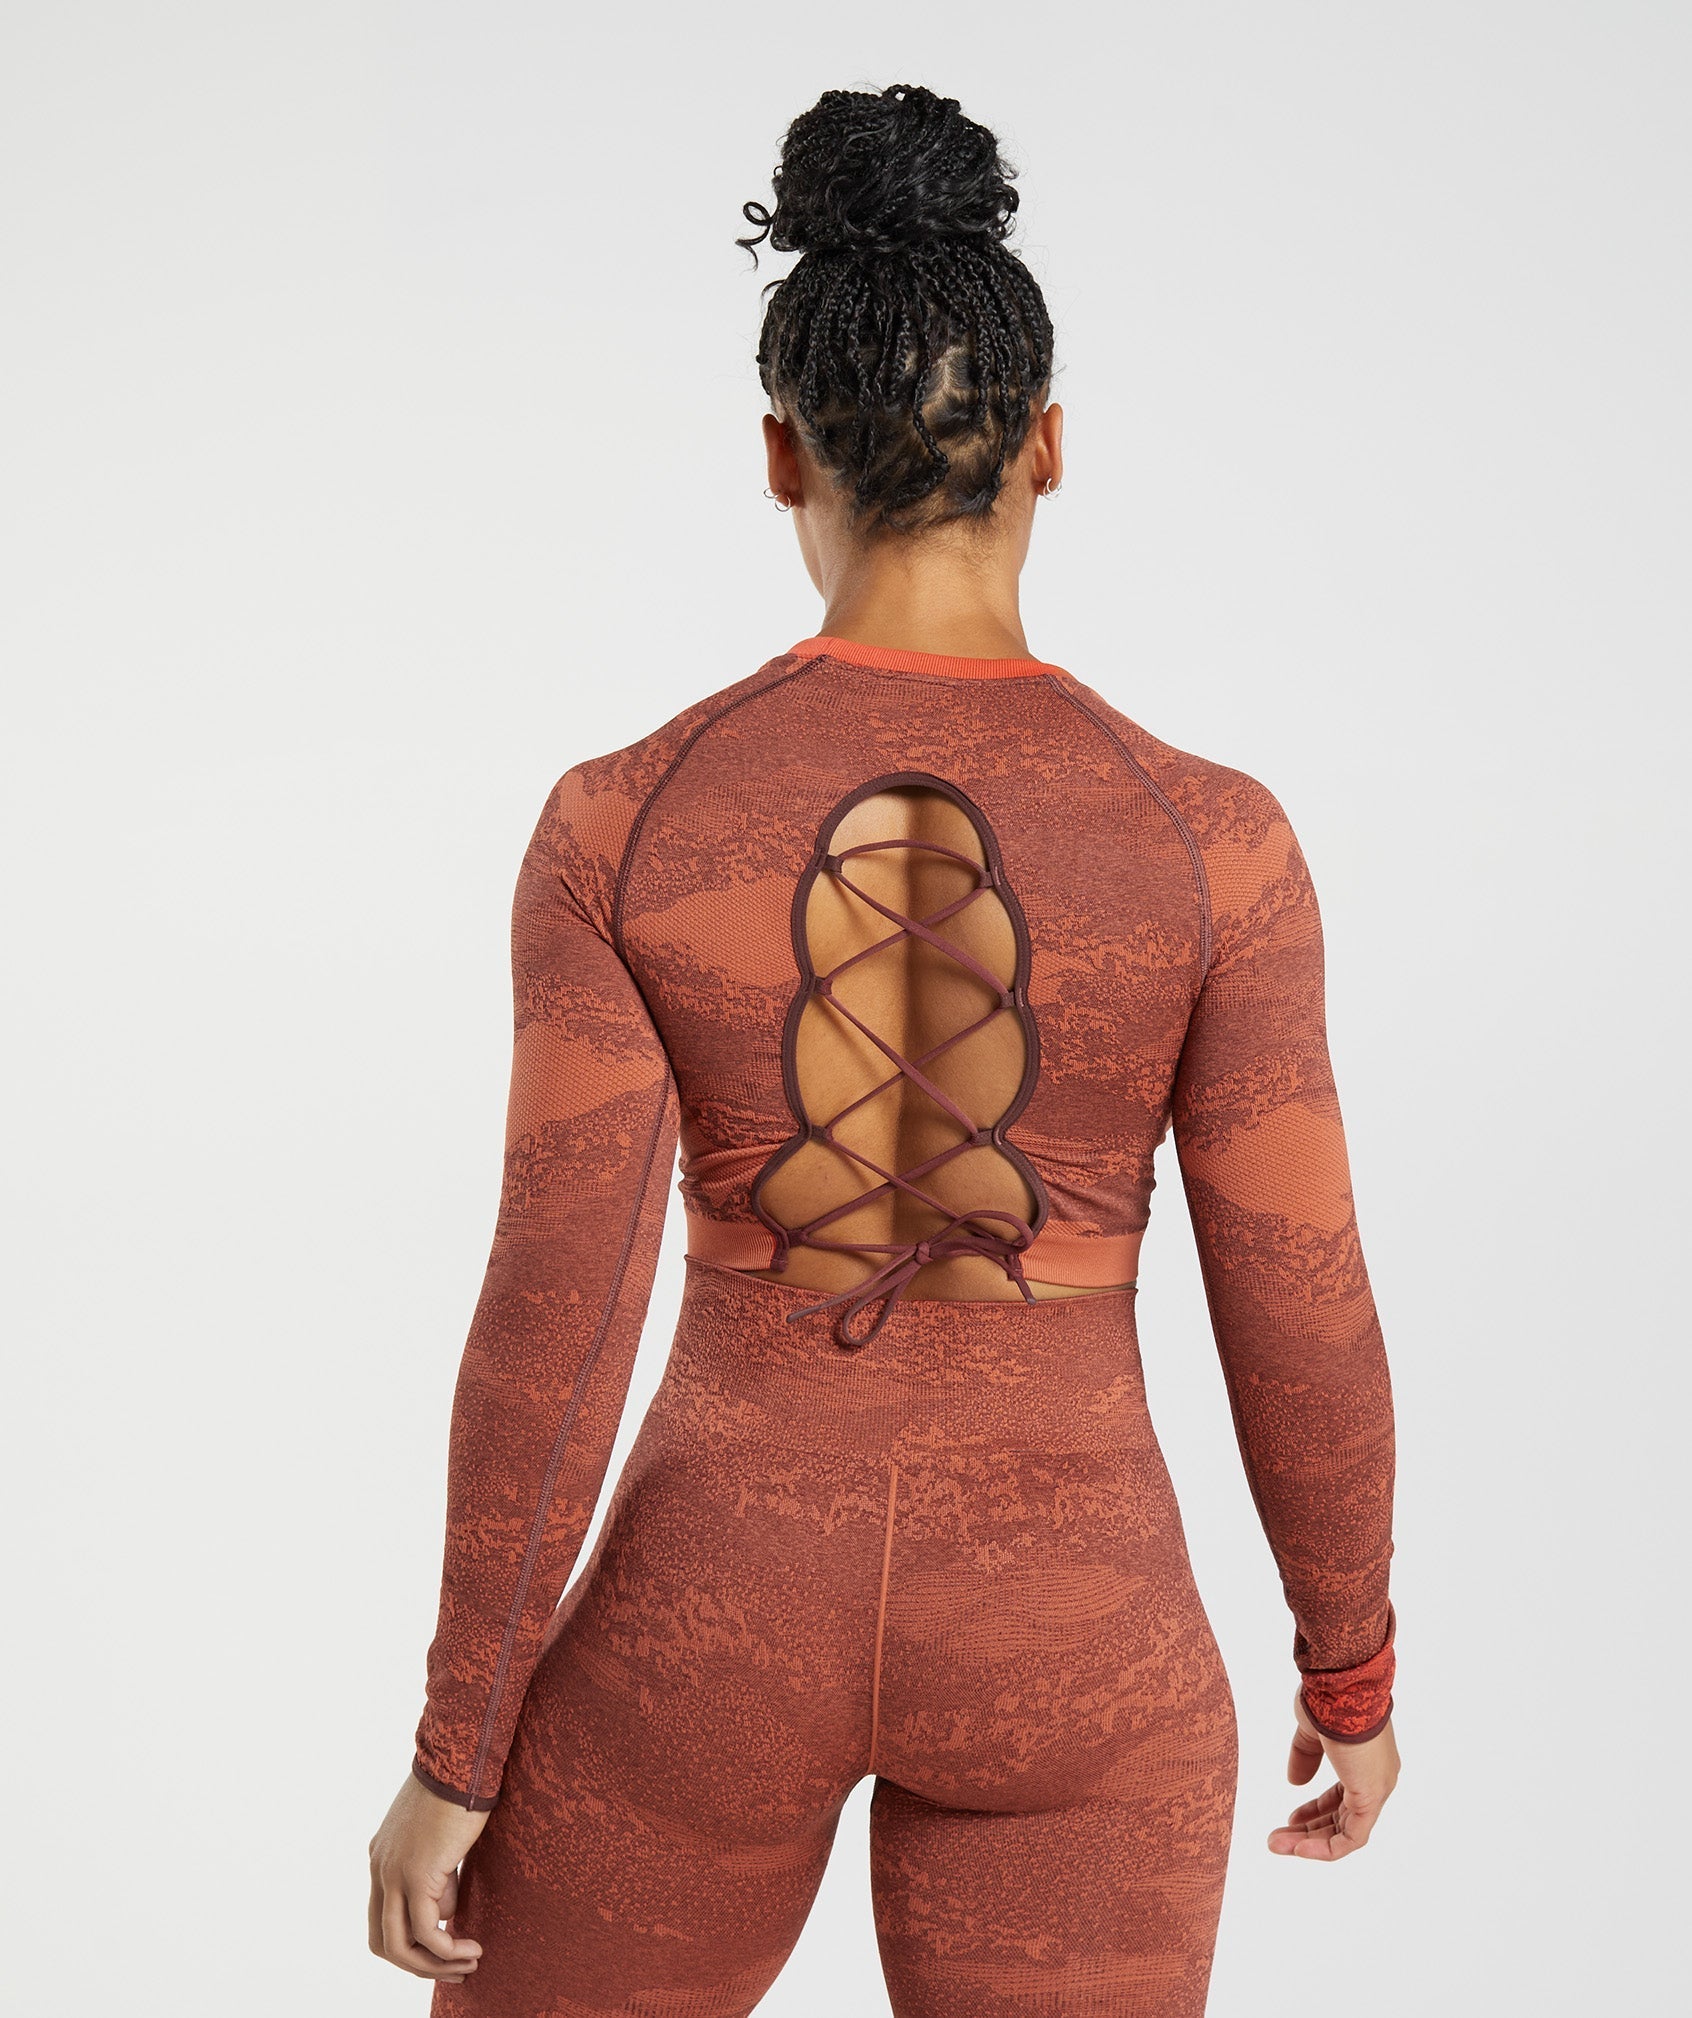 Adapt Camo Seamless Lace Up Back Top in Storm Red/Cherry Brown